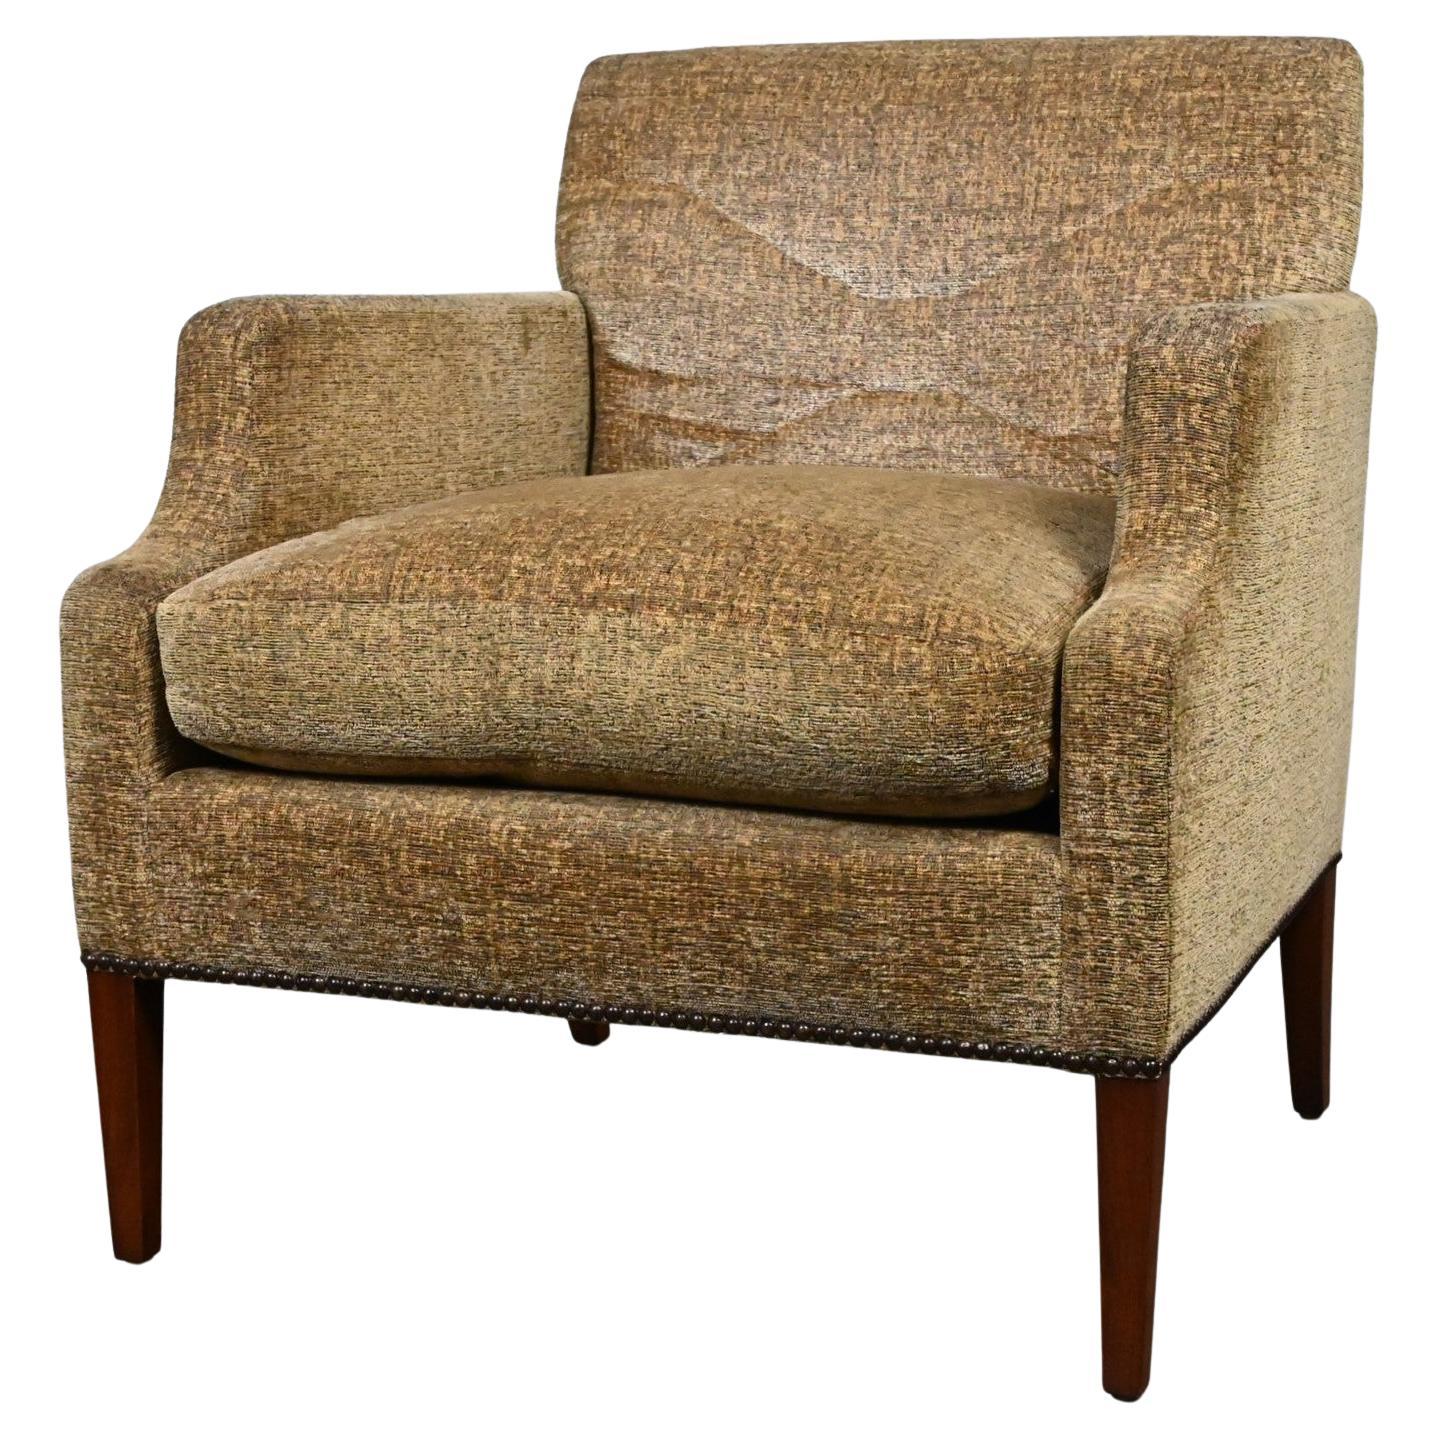 Late 20th - Early 21st Century Modern Khaki Accent Lounge Chair Down Seat For Sale